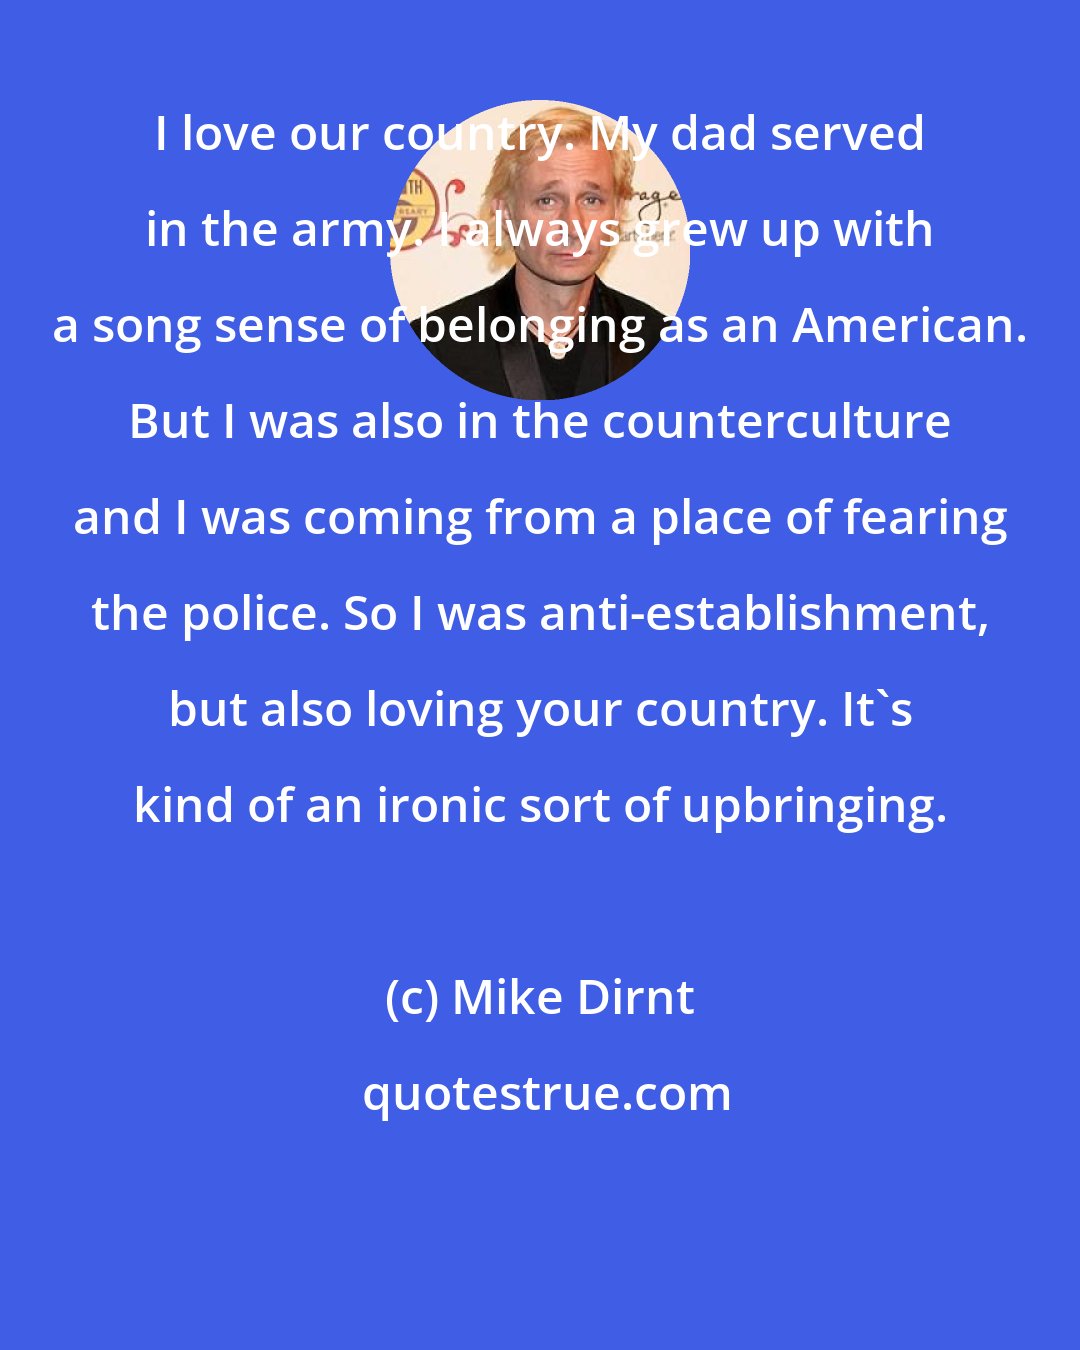 Mike Dirnt: I love our country. My dad served in the army. I always grew up with a song sense of belonging as an American. But I was also in the counterculture and I was coming from a place of fearing the police. So I was anti-establishment, but also loving your country. It's kind of an ironic sort of upbringing.